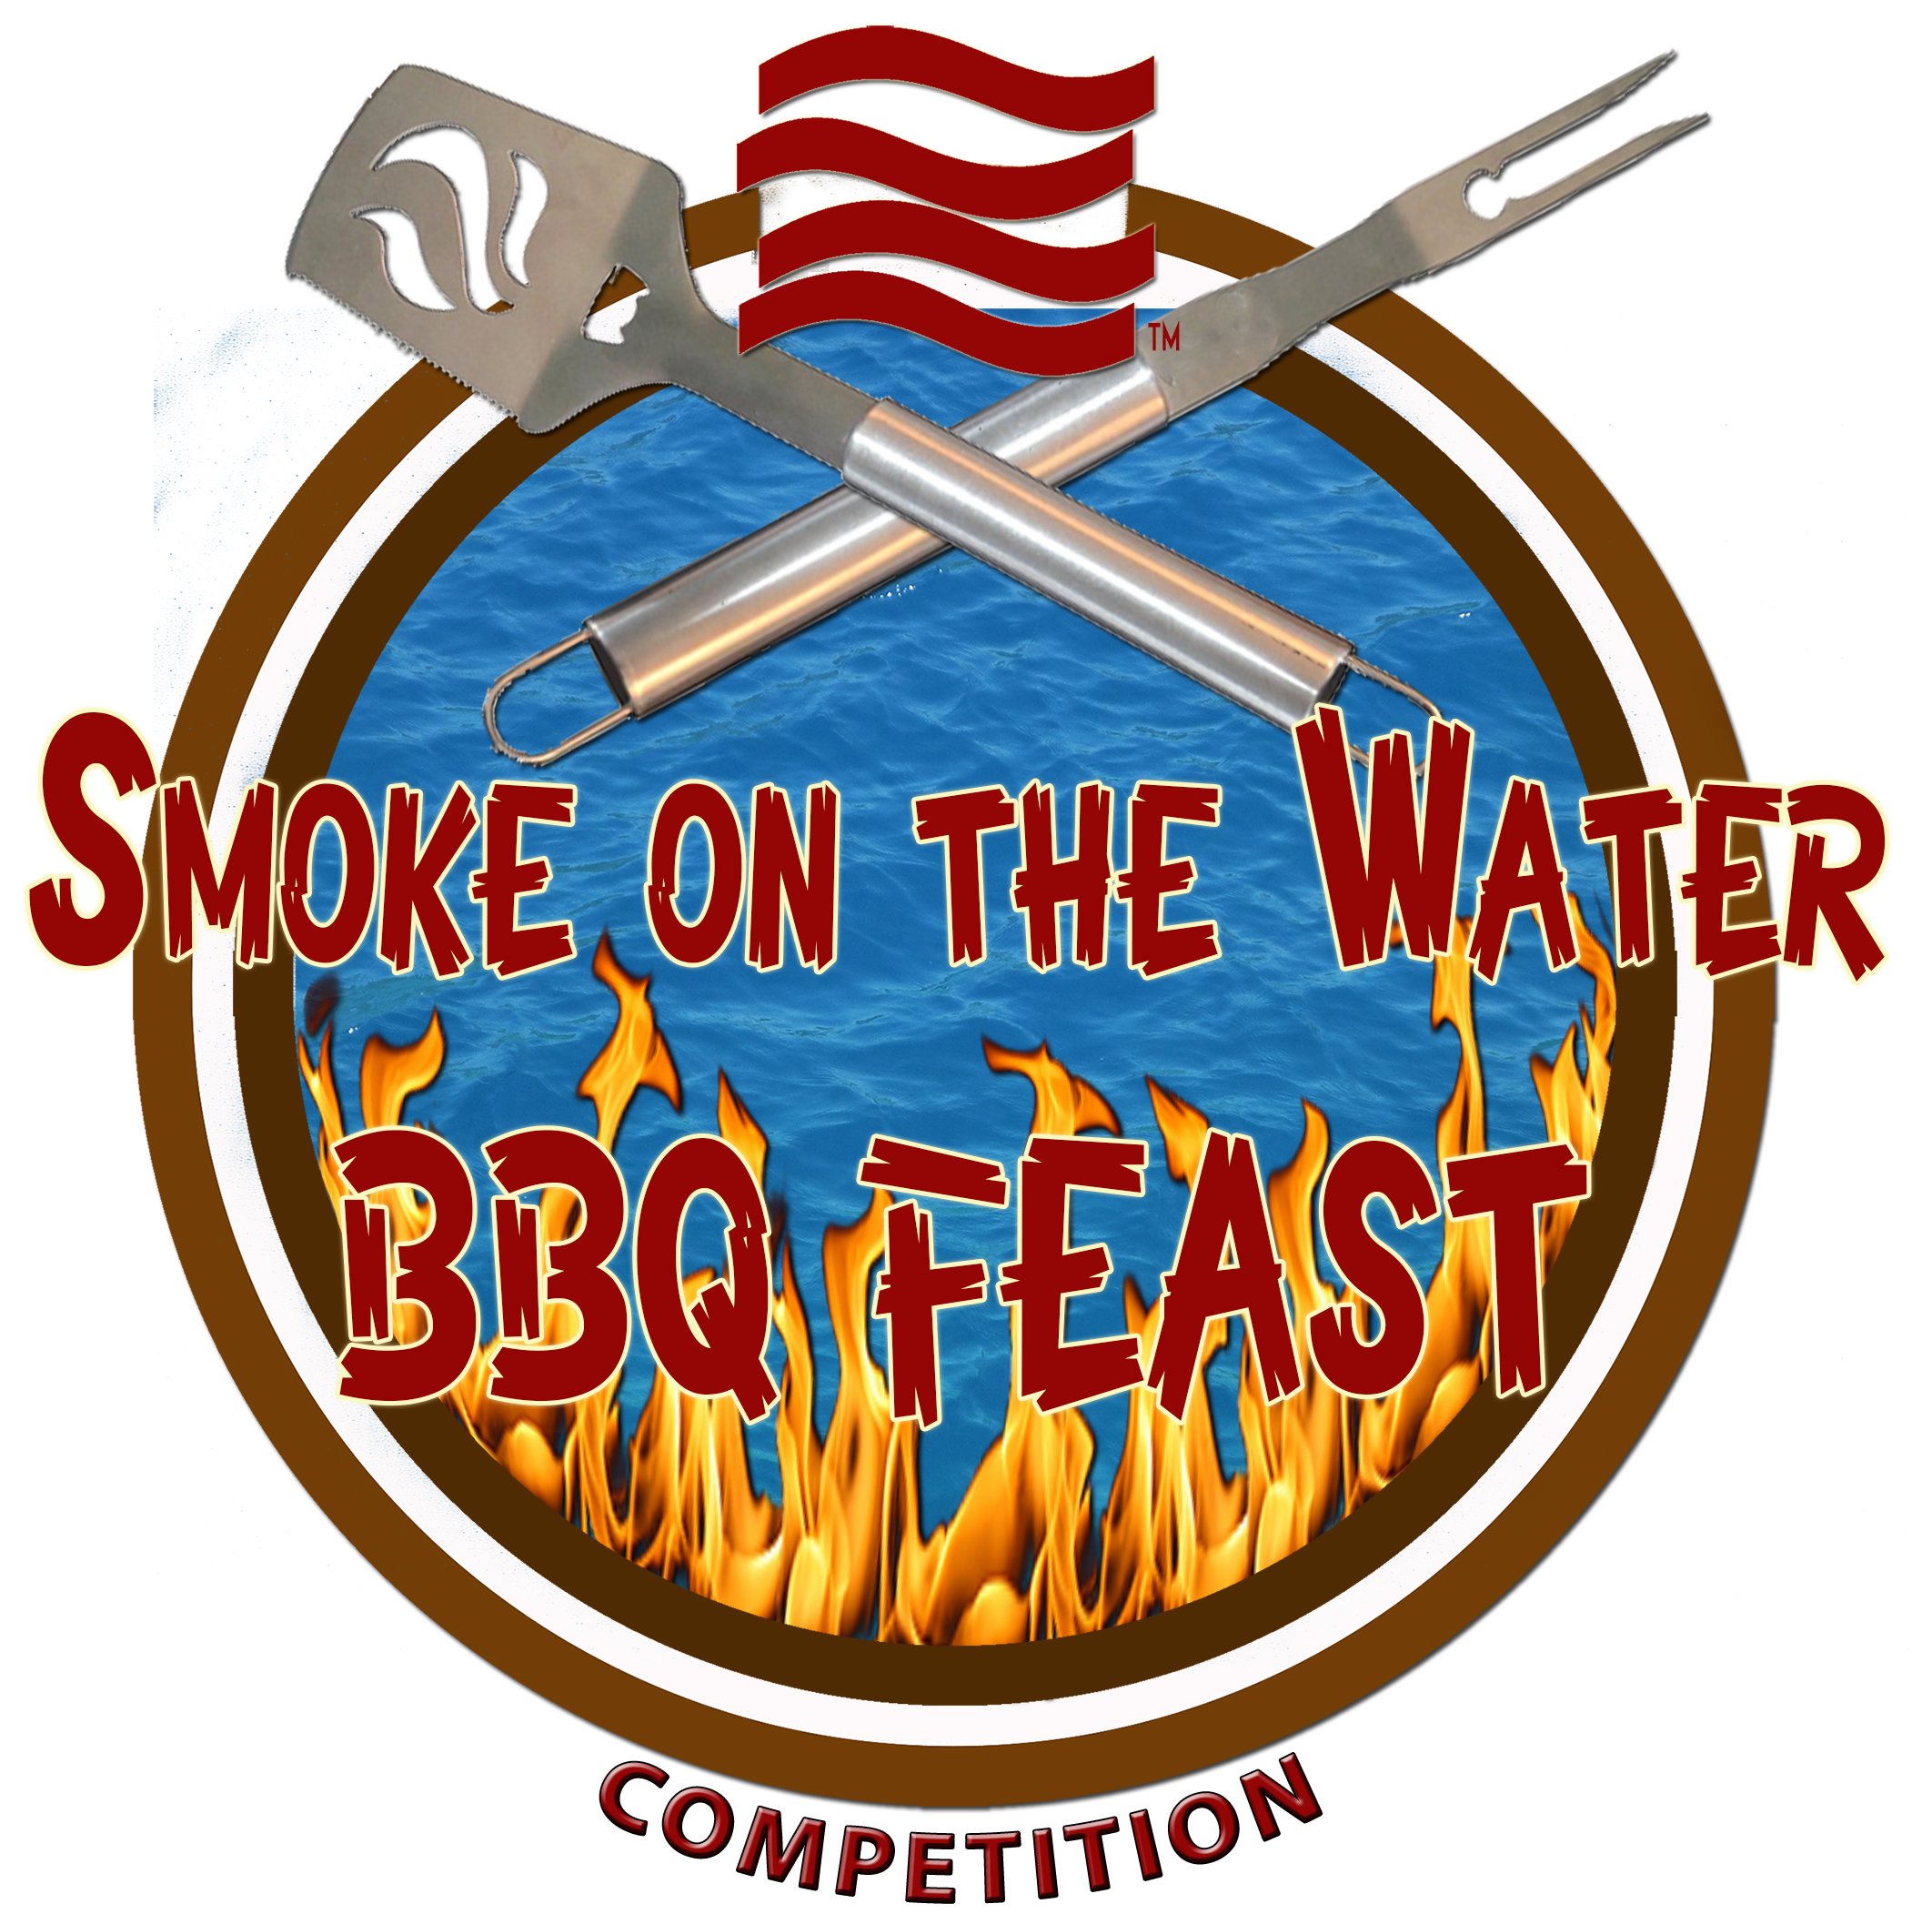 Smoke on the Water BBQ Feast & Competition